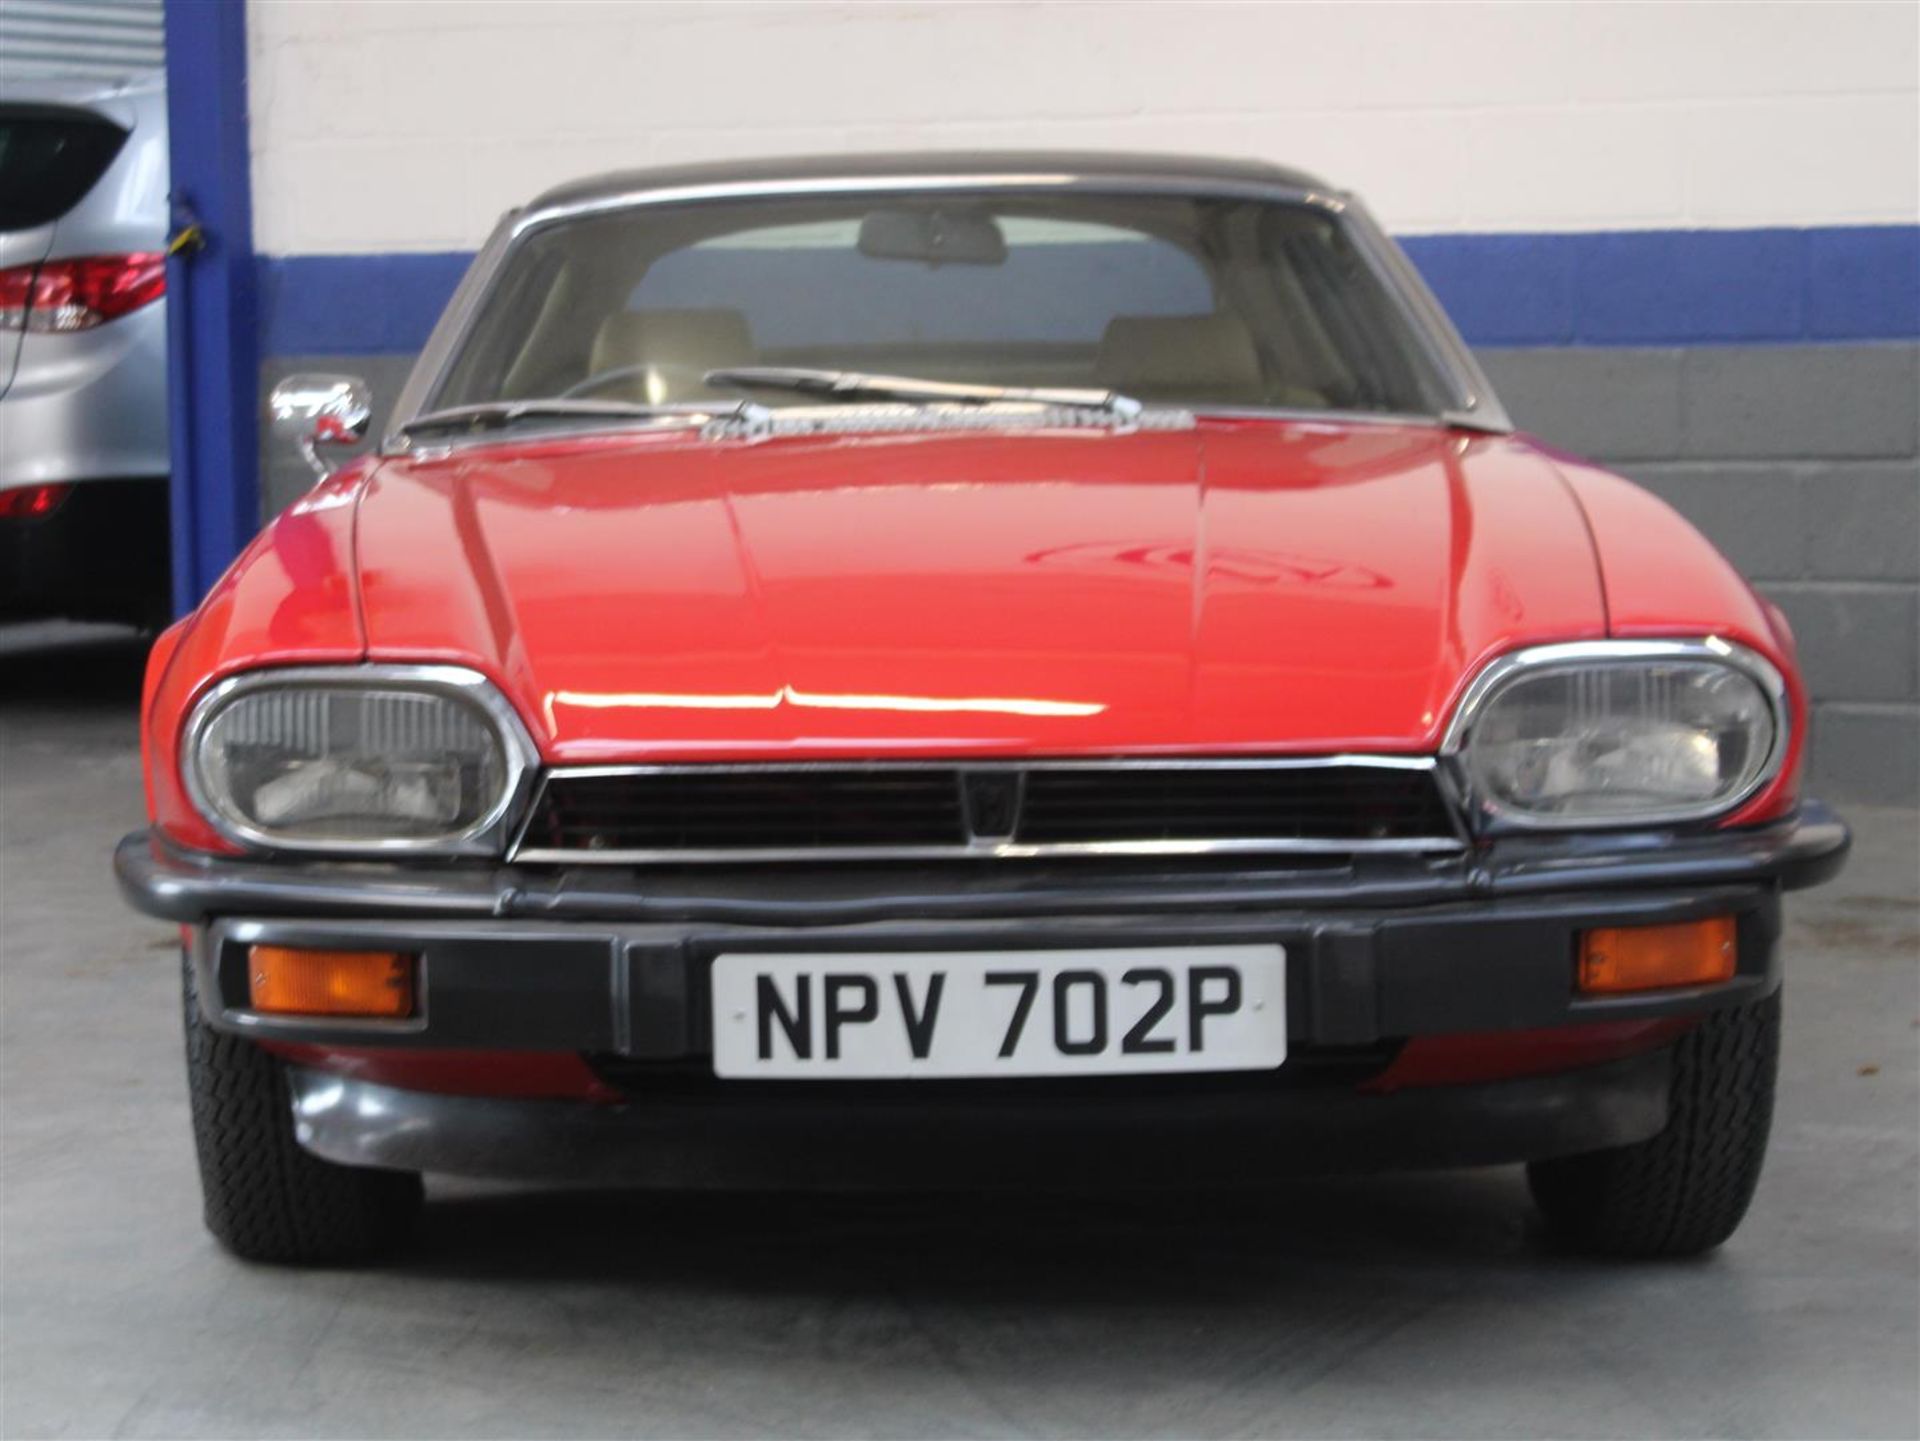 1976 Jaguar XJ-S 5.3 V12 Coupe Auto 29,030 miles from new - Image 2 of 23